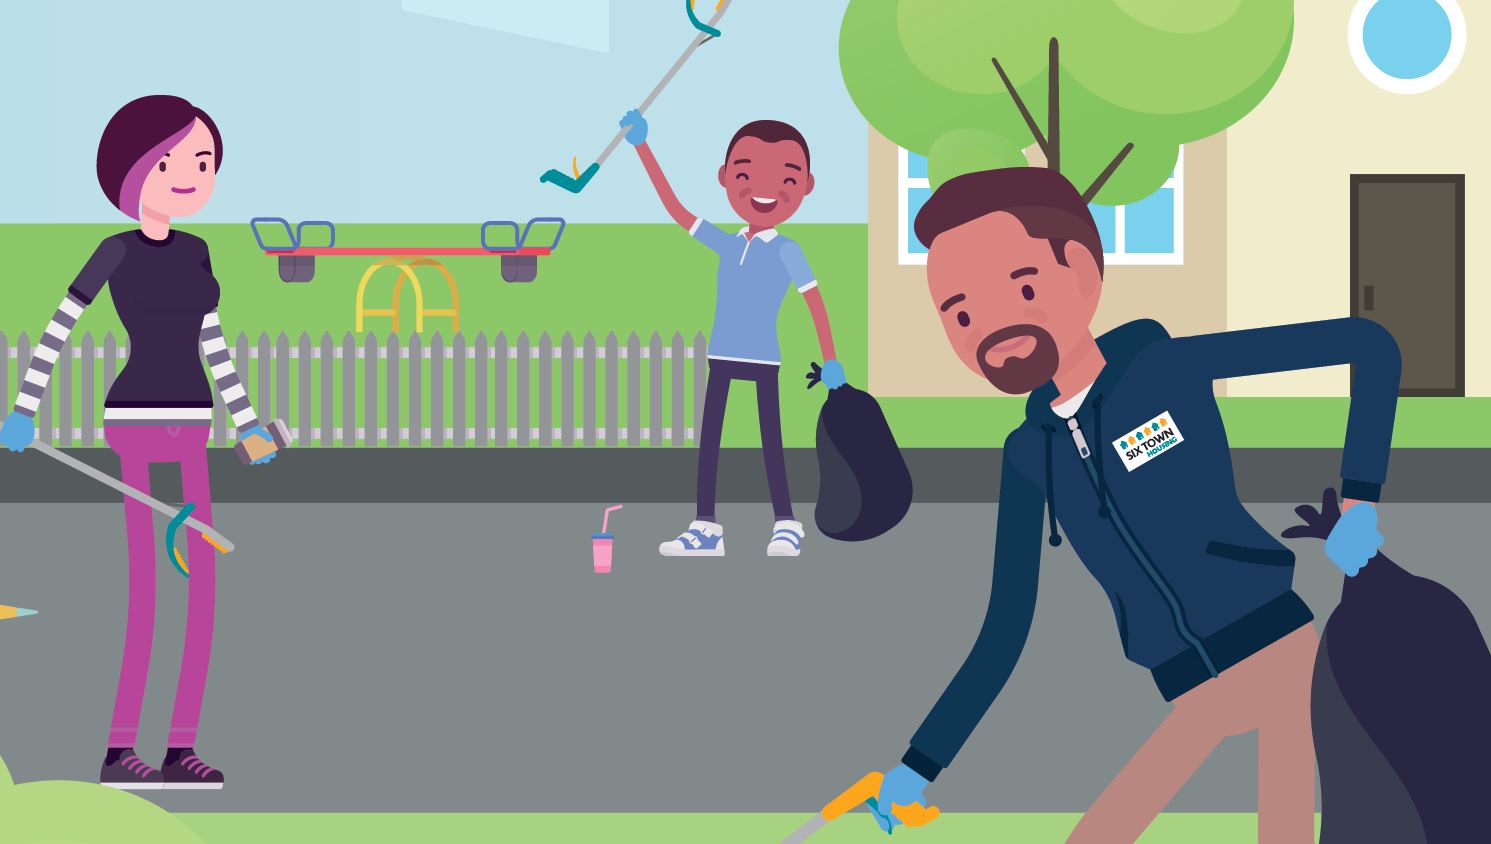 Illustration of three people joining in a community litterpick with one wearing a Six Town Housing uniform.